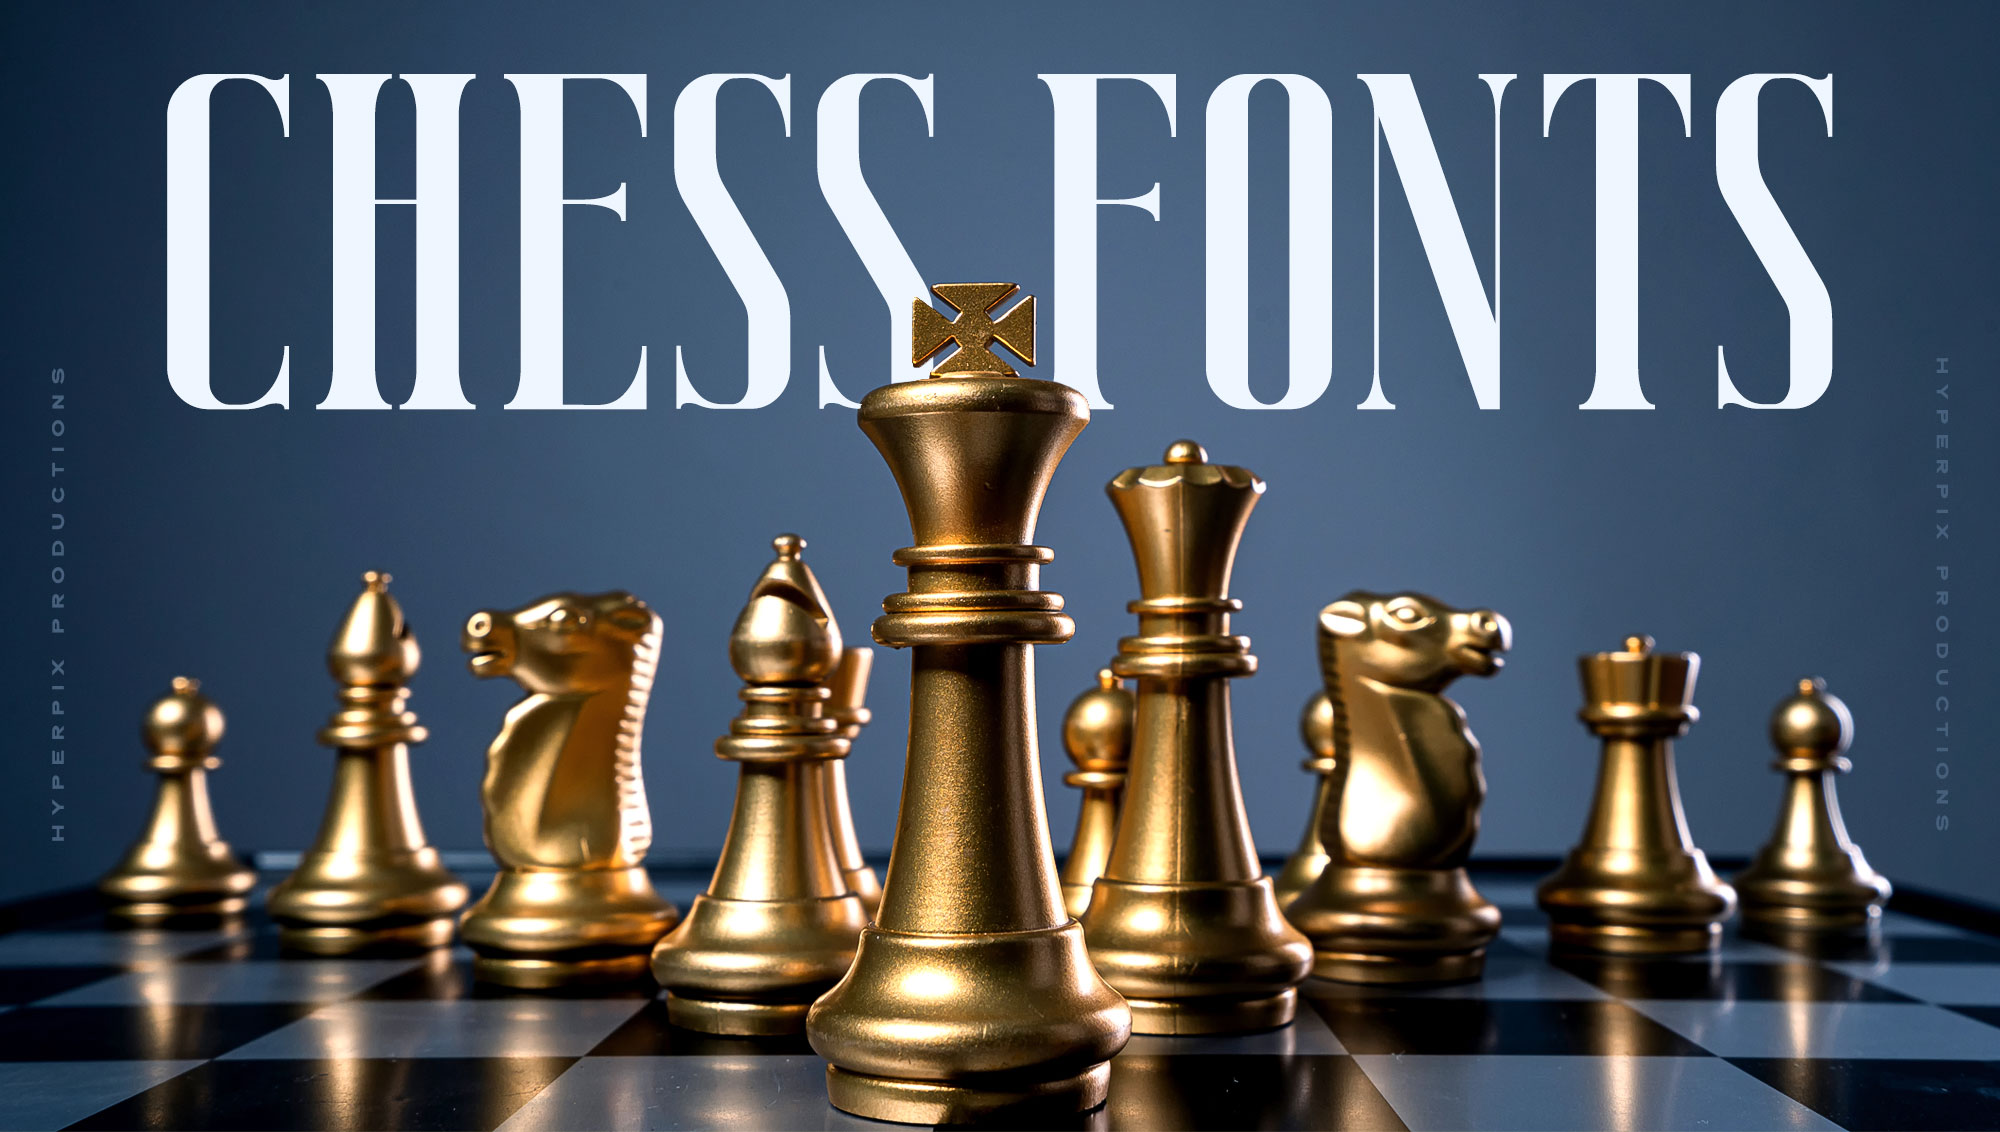 Coolest Projects Online: The Accessible Chess Board